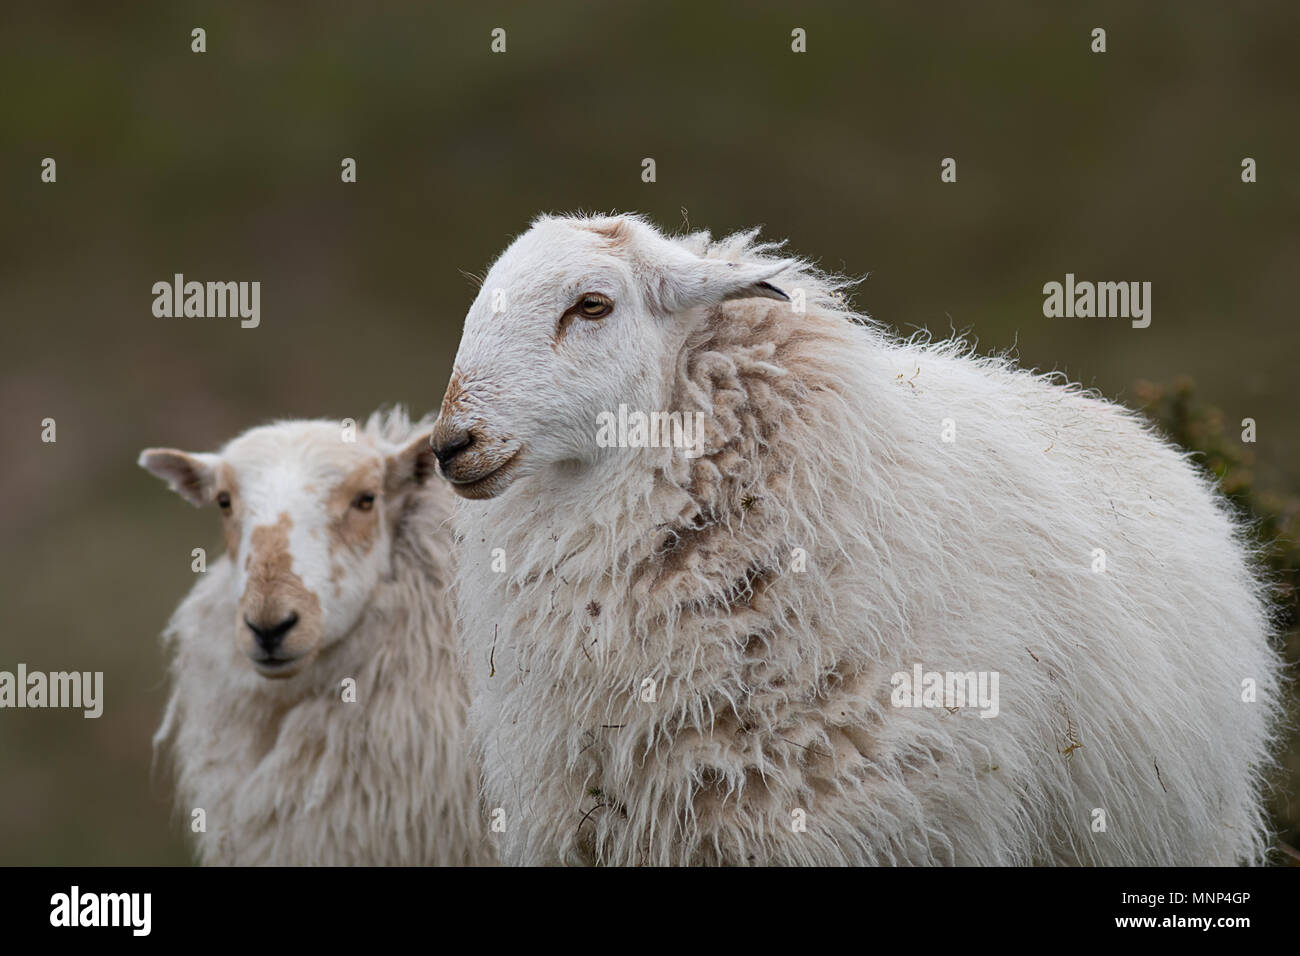 A close up portrait of a sheep with a shaggy woolly coat and another slightly behind out of full focus staring left Stock Photo